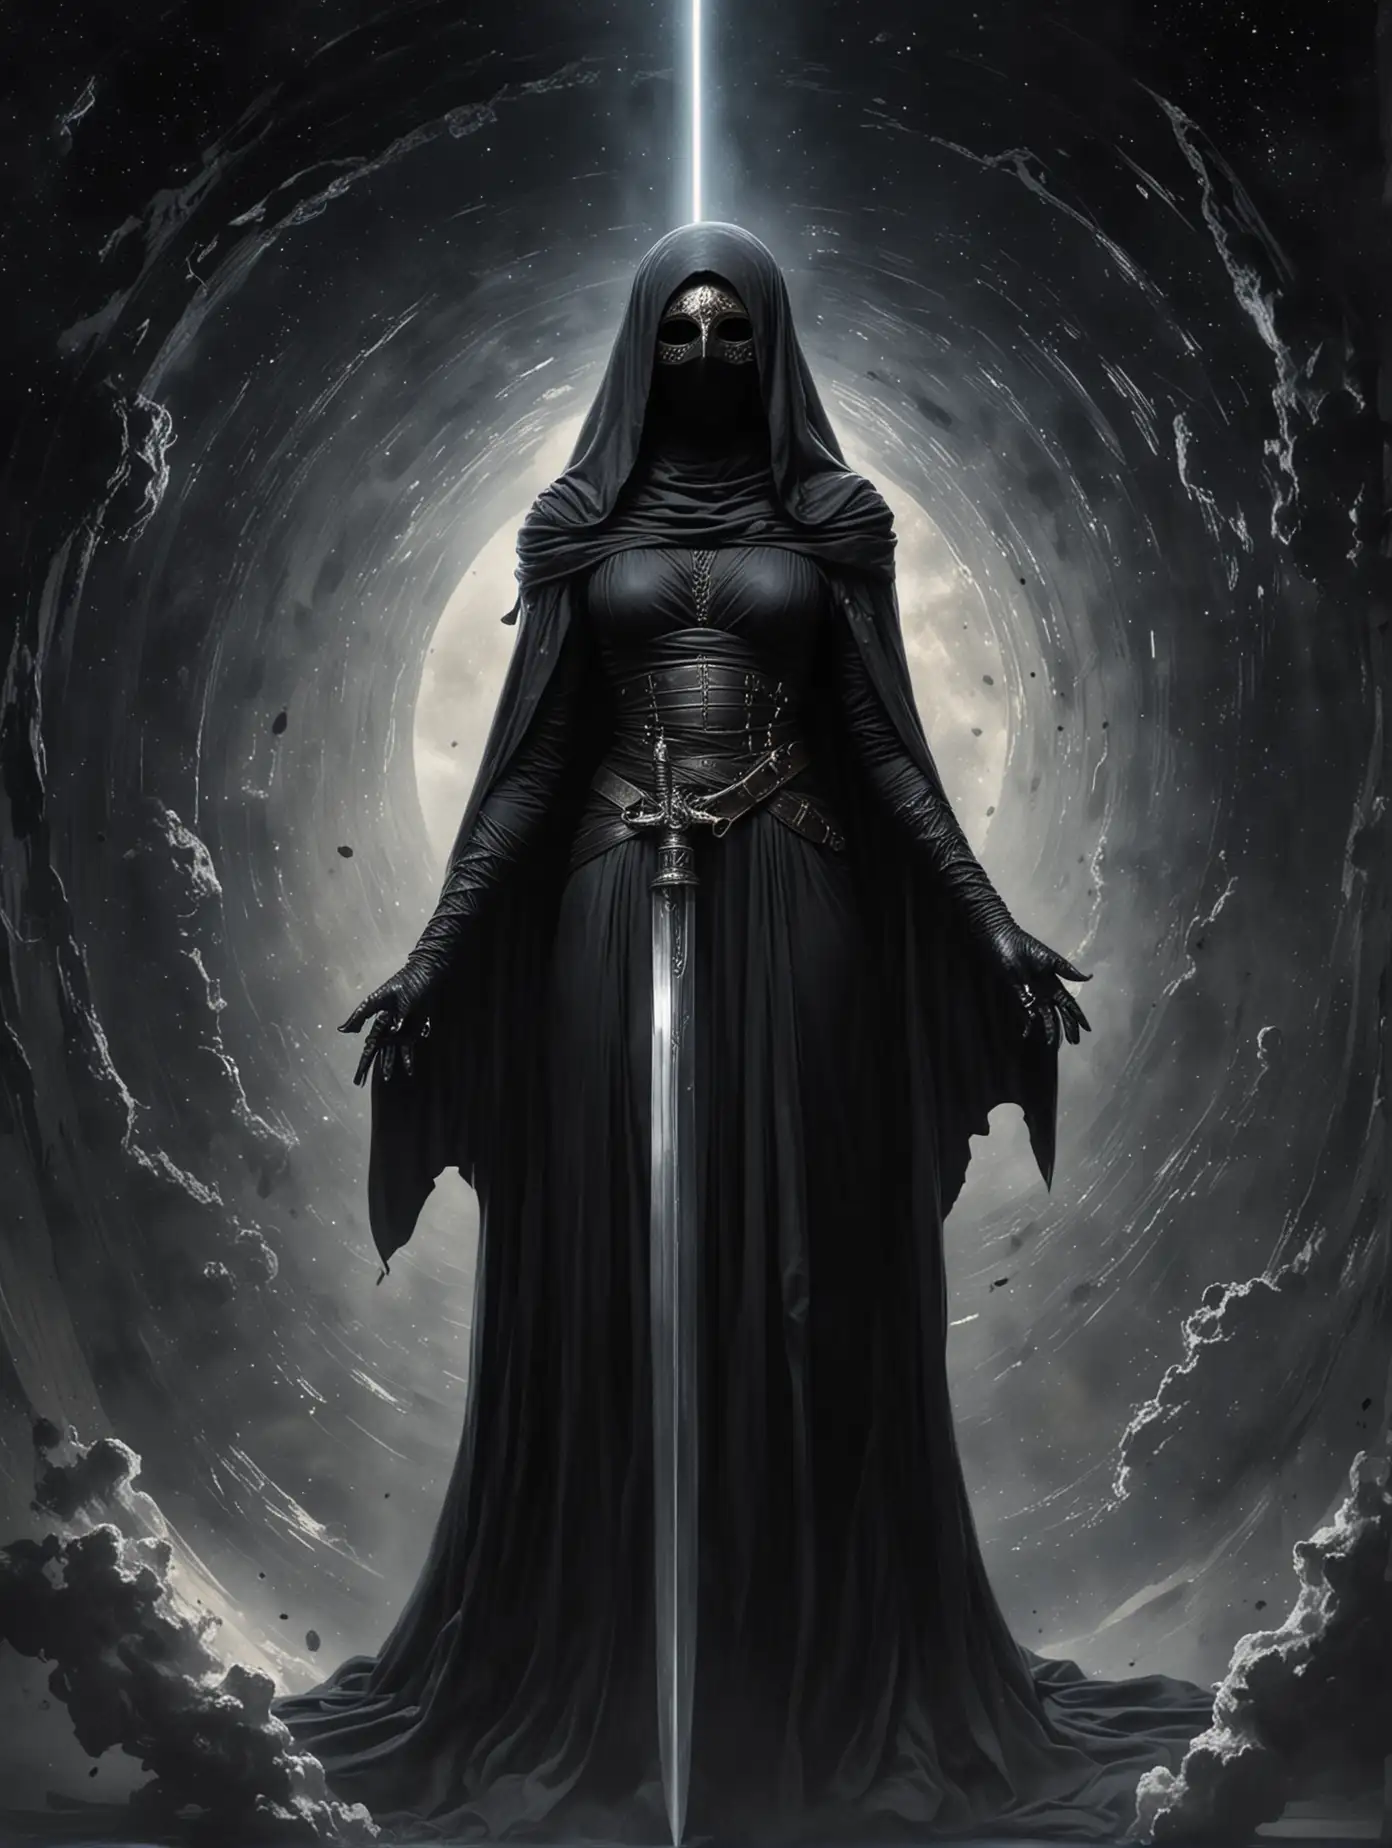 Sister-of-the-Bene-Gesserit-with-Black-Sword-and-Halolike-Black-Hole